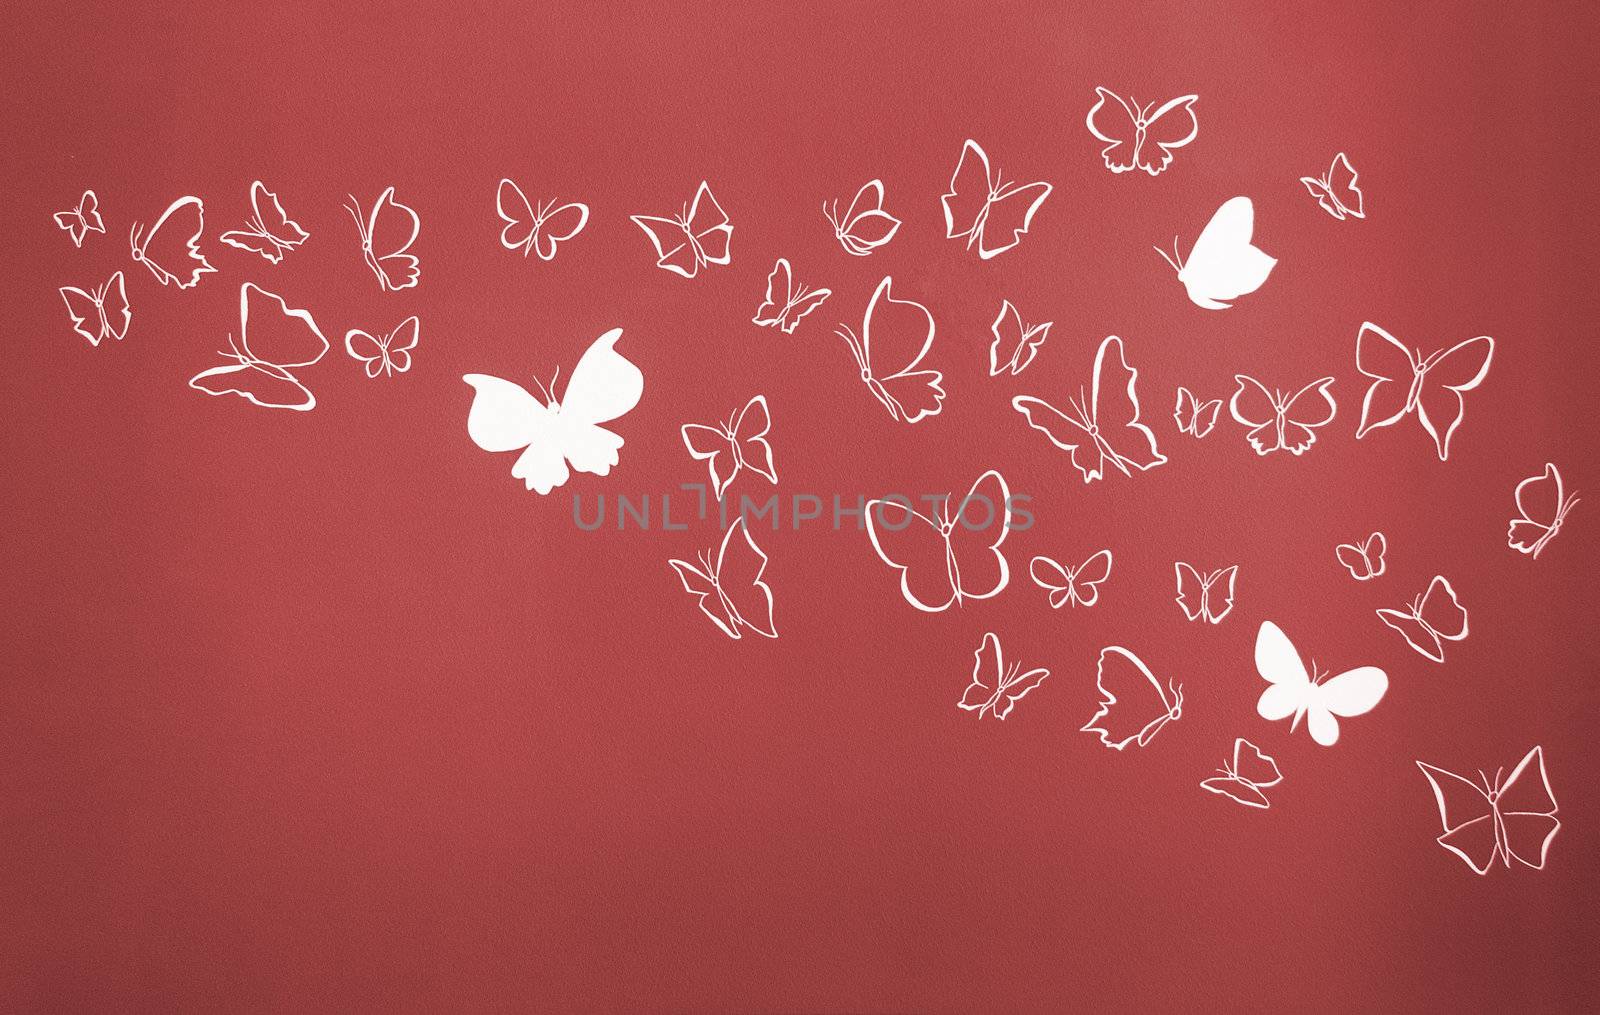 Group of white silhouettes butterflies flying over a red background